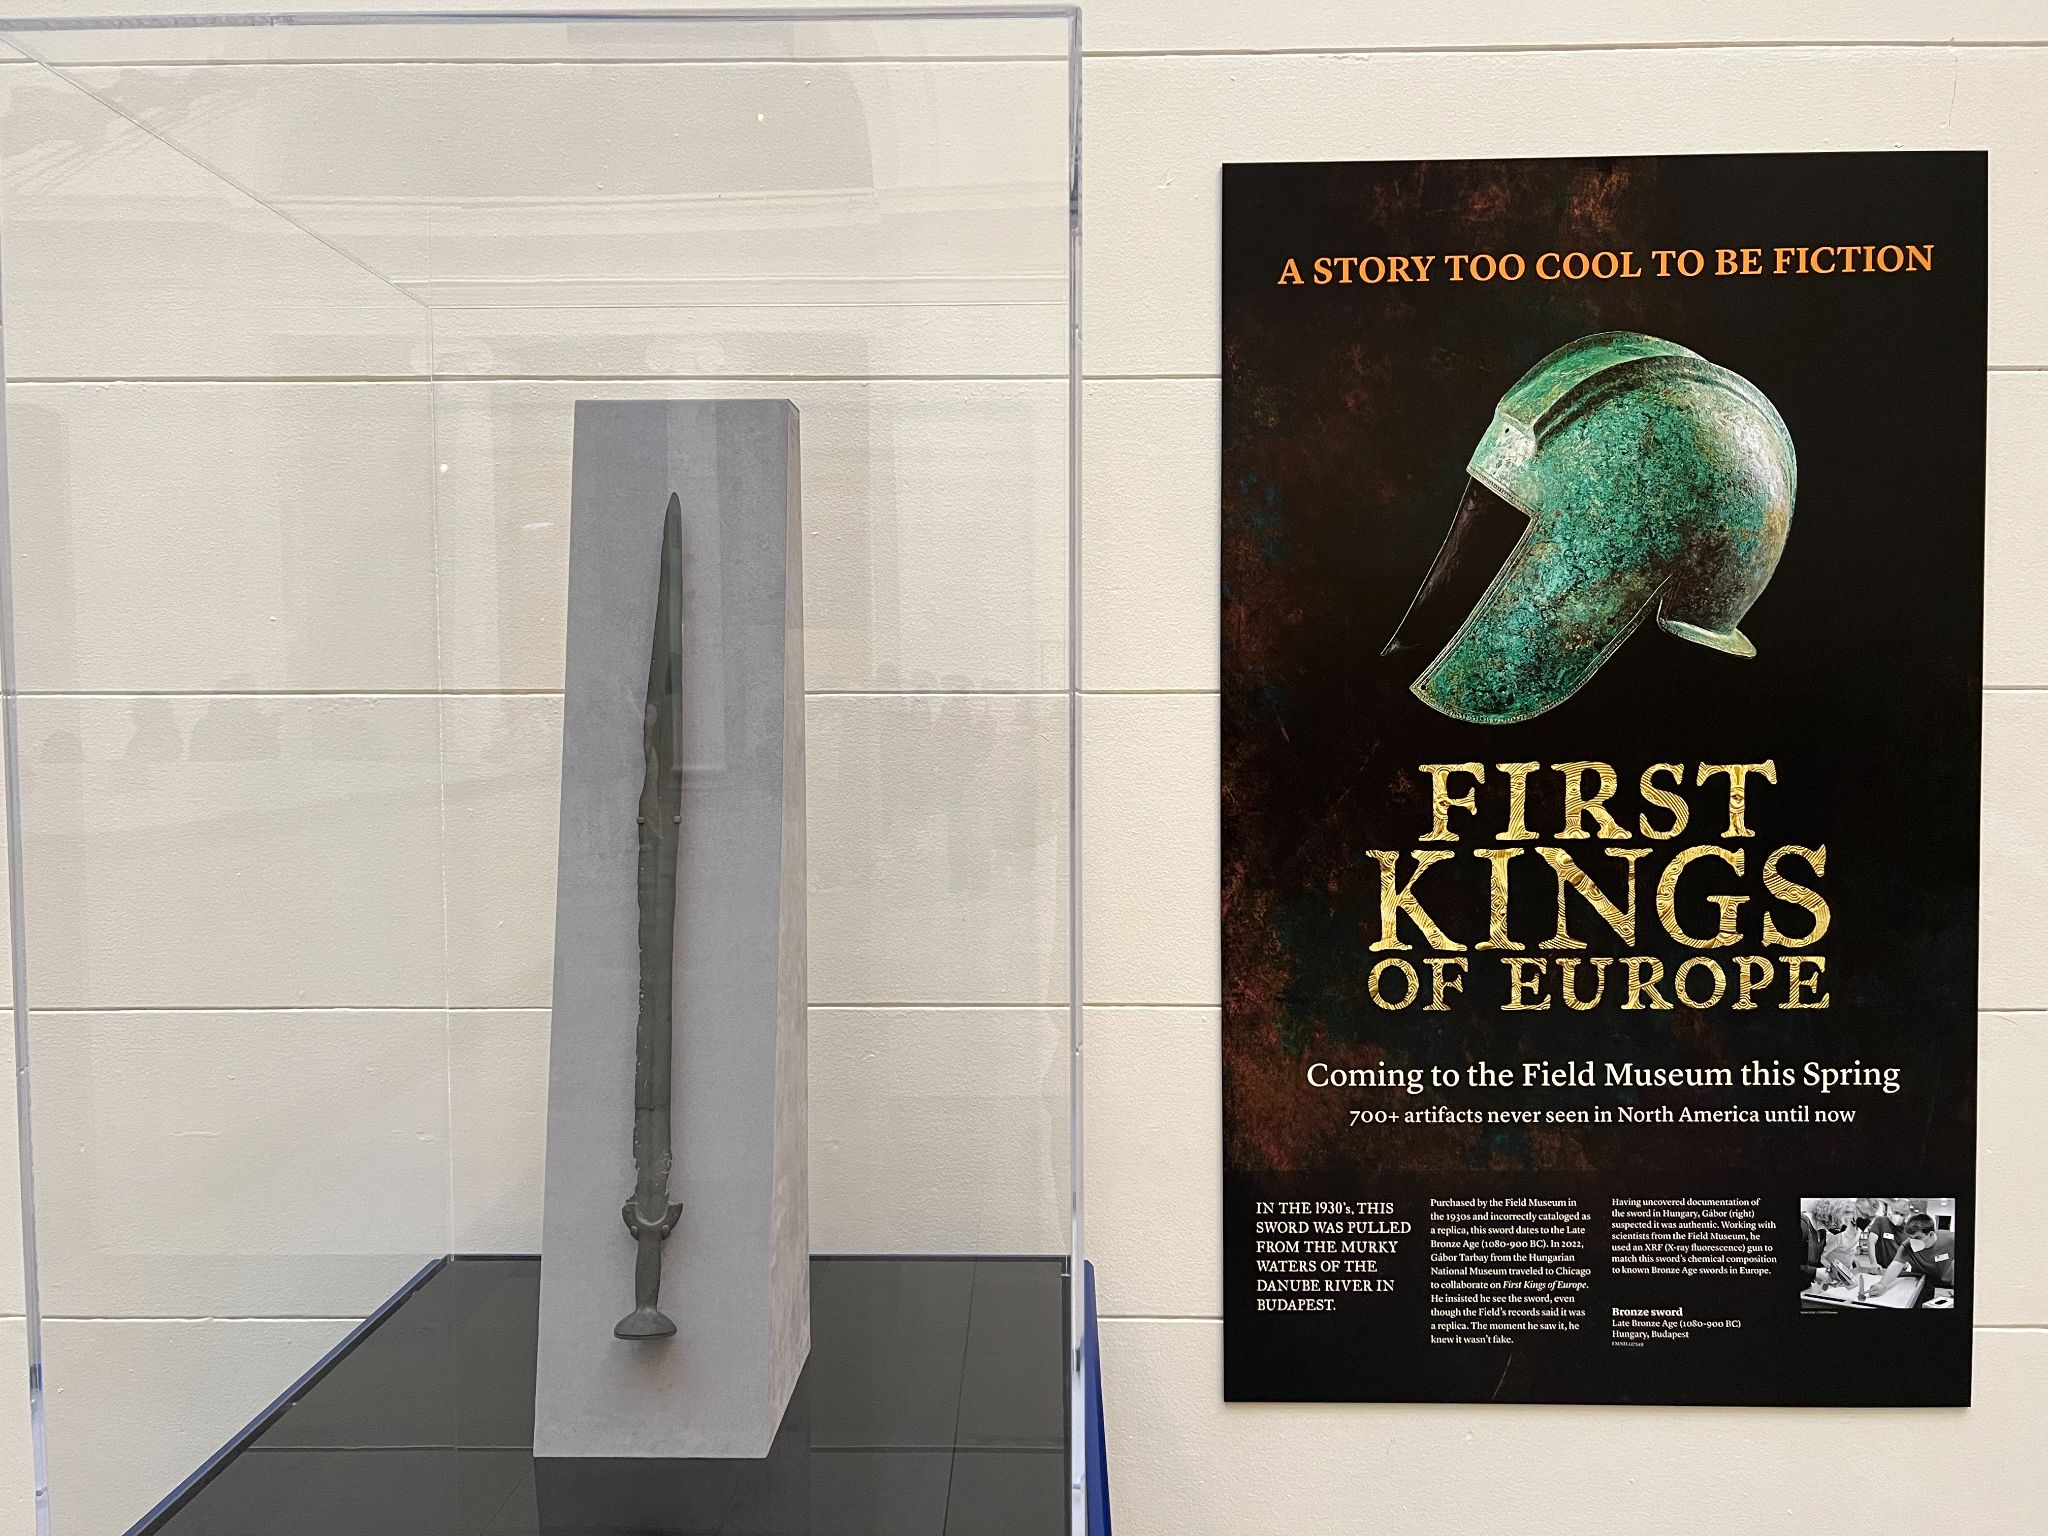 A bronze sword in a display case, next to an exhibition poster for First Kings of Europe.